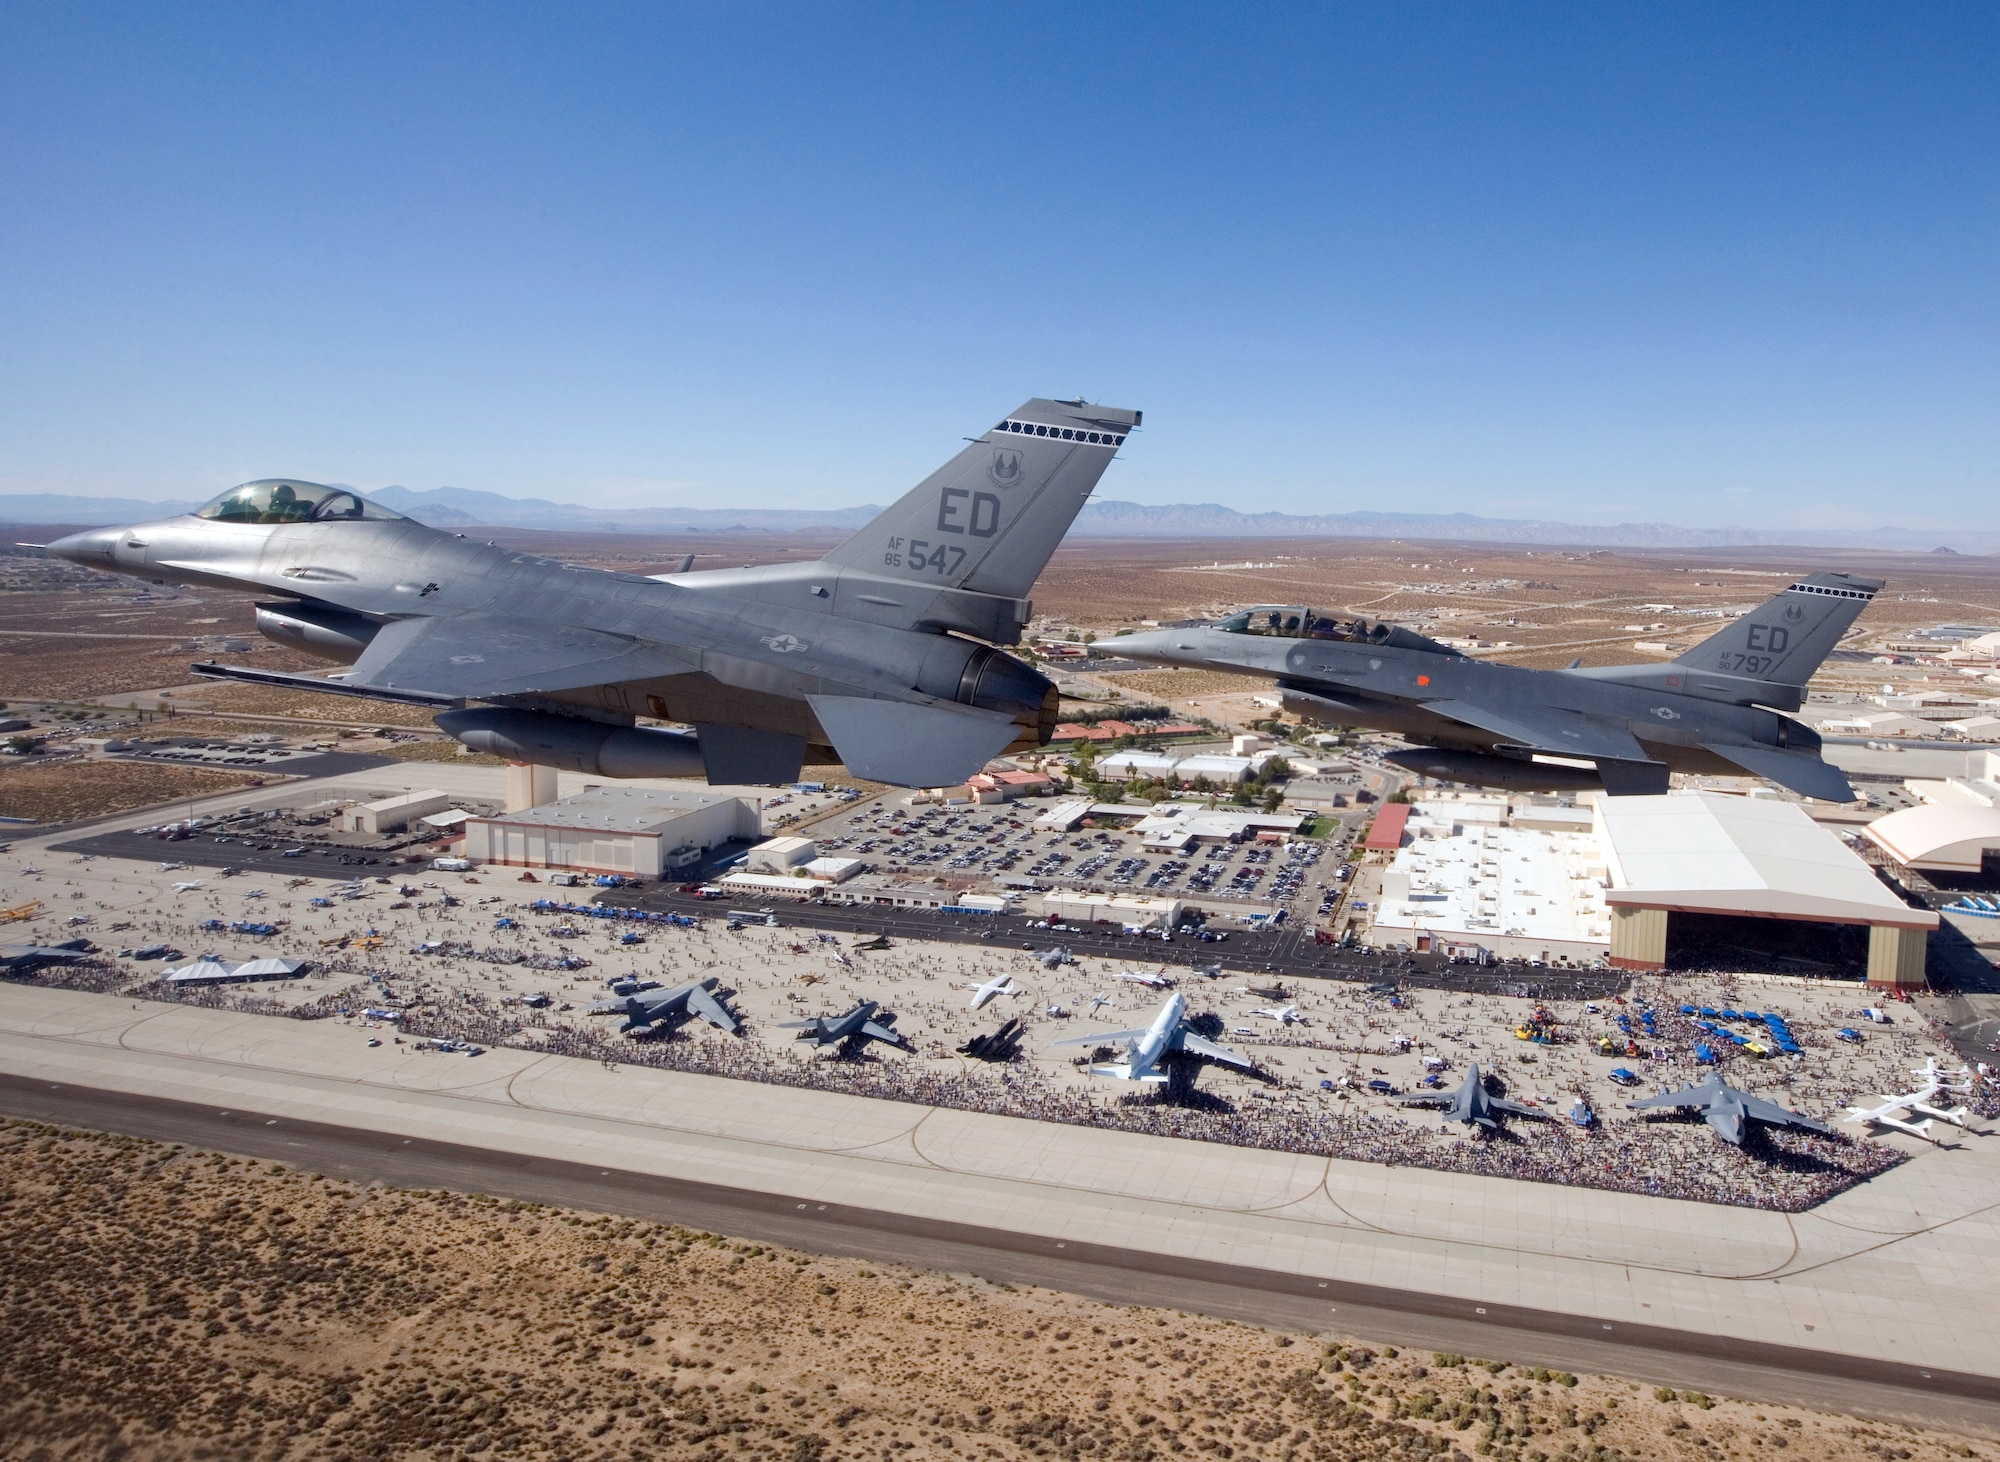 Two F-16 Fighting Falcons fly over Edwards AFB during the October 17, 2009 air show.  95th Air Base Wing Public Affairs received the 2009 Air Force Integrated Communication Excellence Award for branding and marketing the air show and open house that drew more than 225,000 attendees. Air Force photo by Chad Bellay.